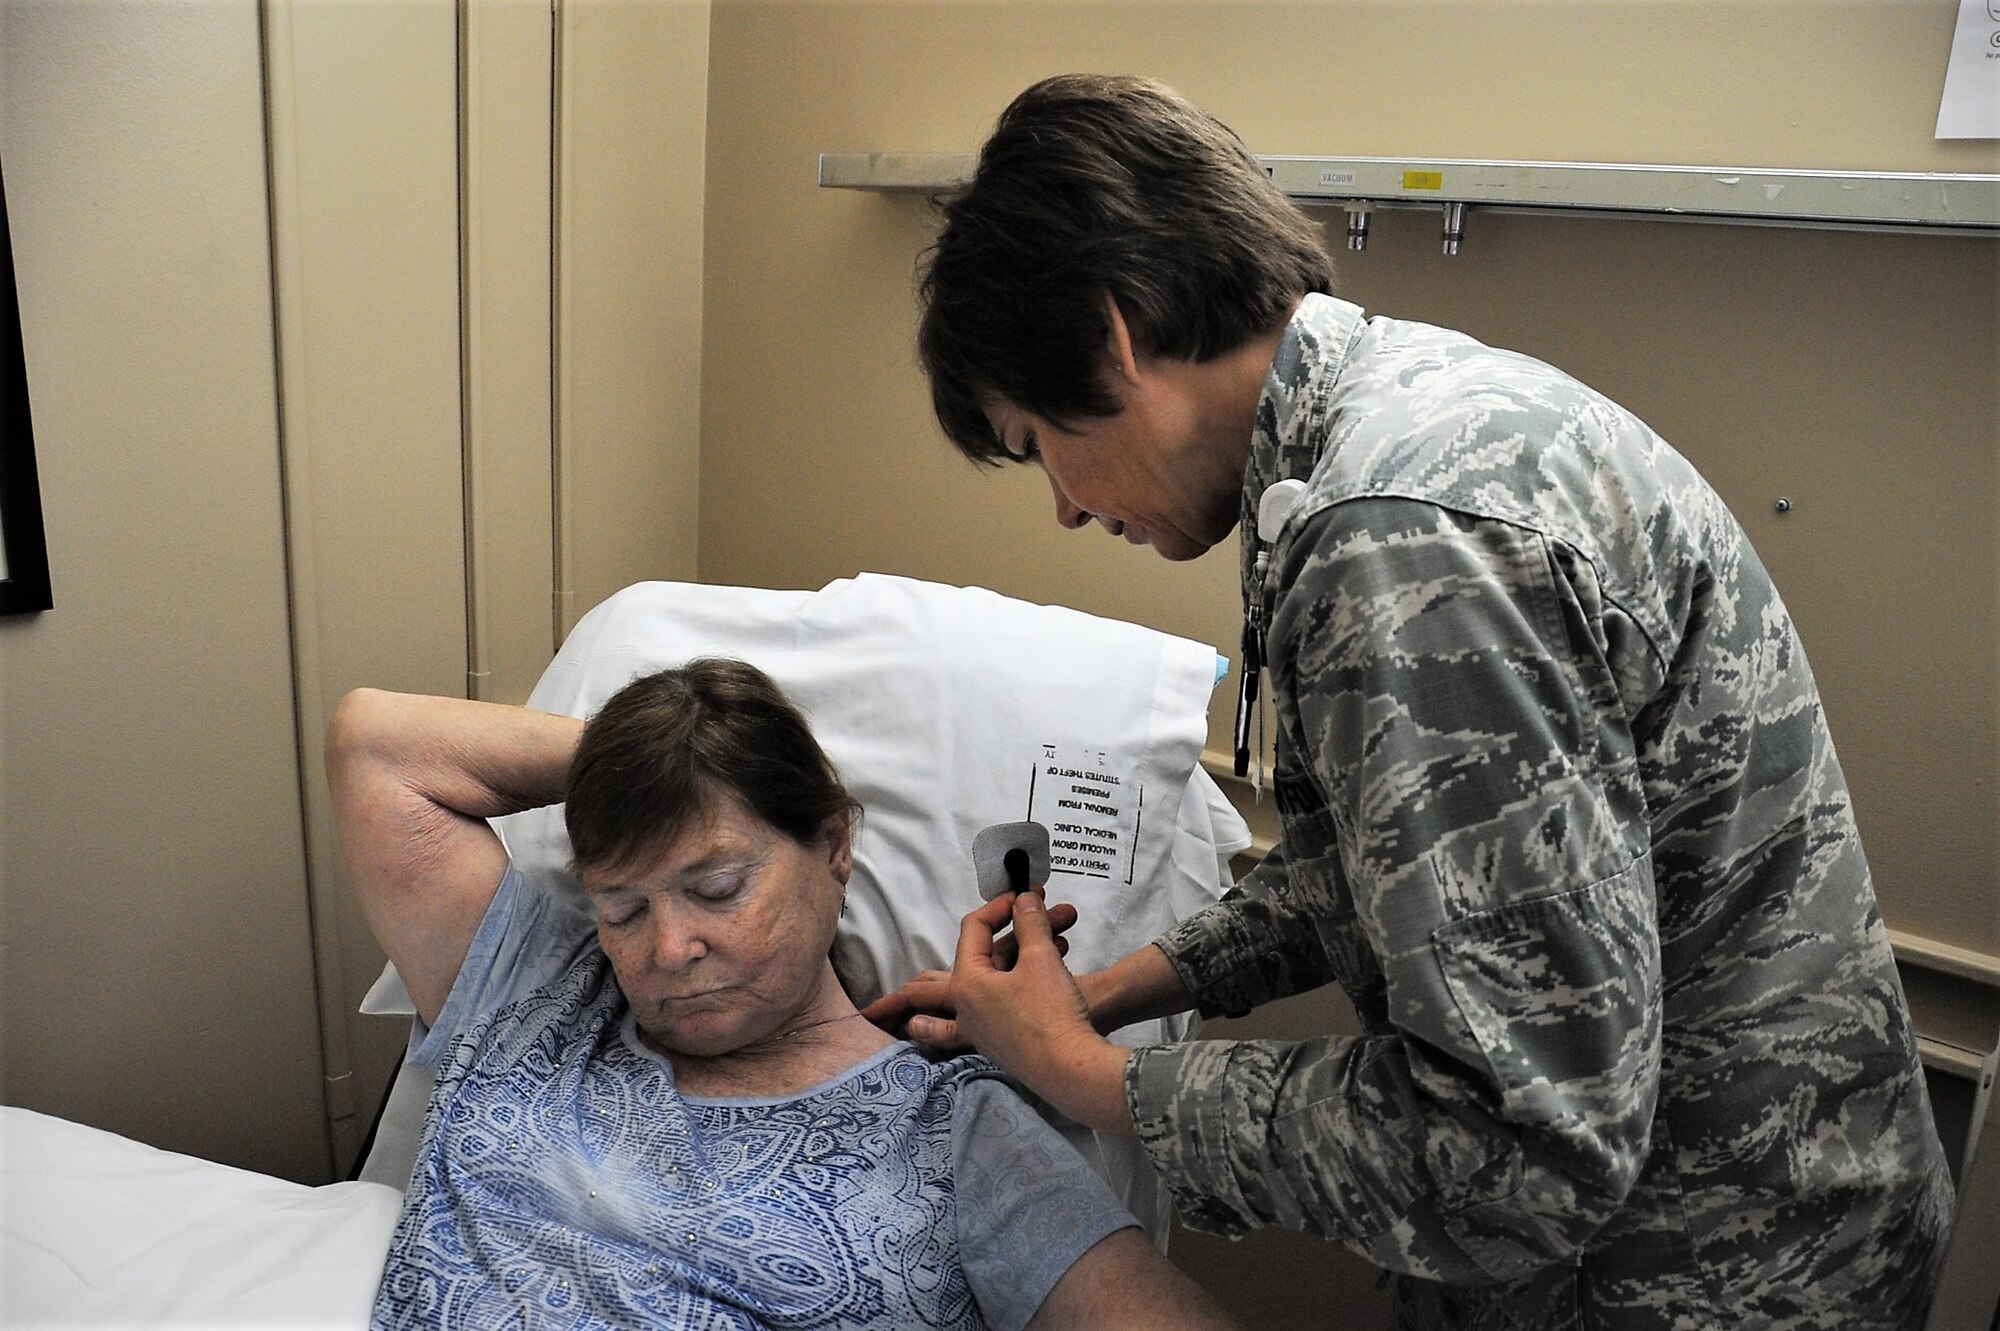 Nerve Scrambler Therapy lessens pain for warfighters, Wounded Warriors